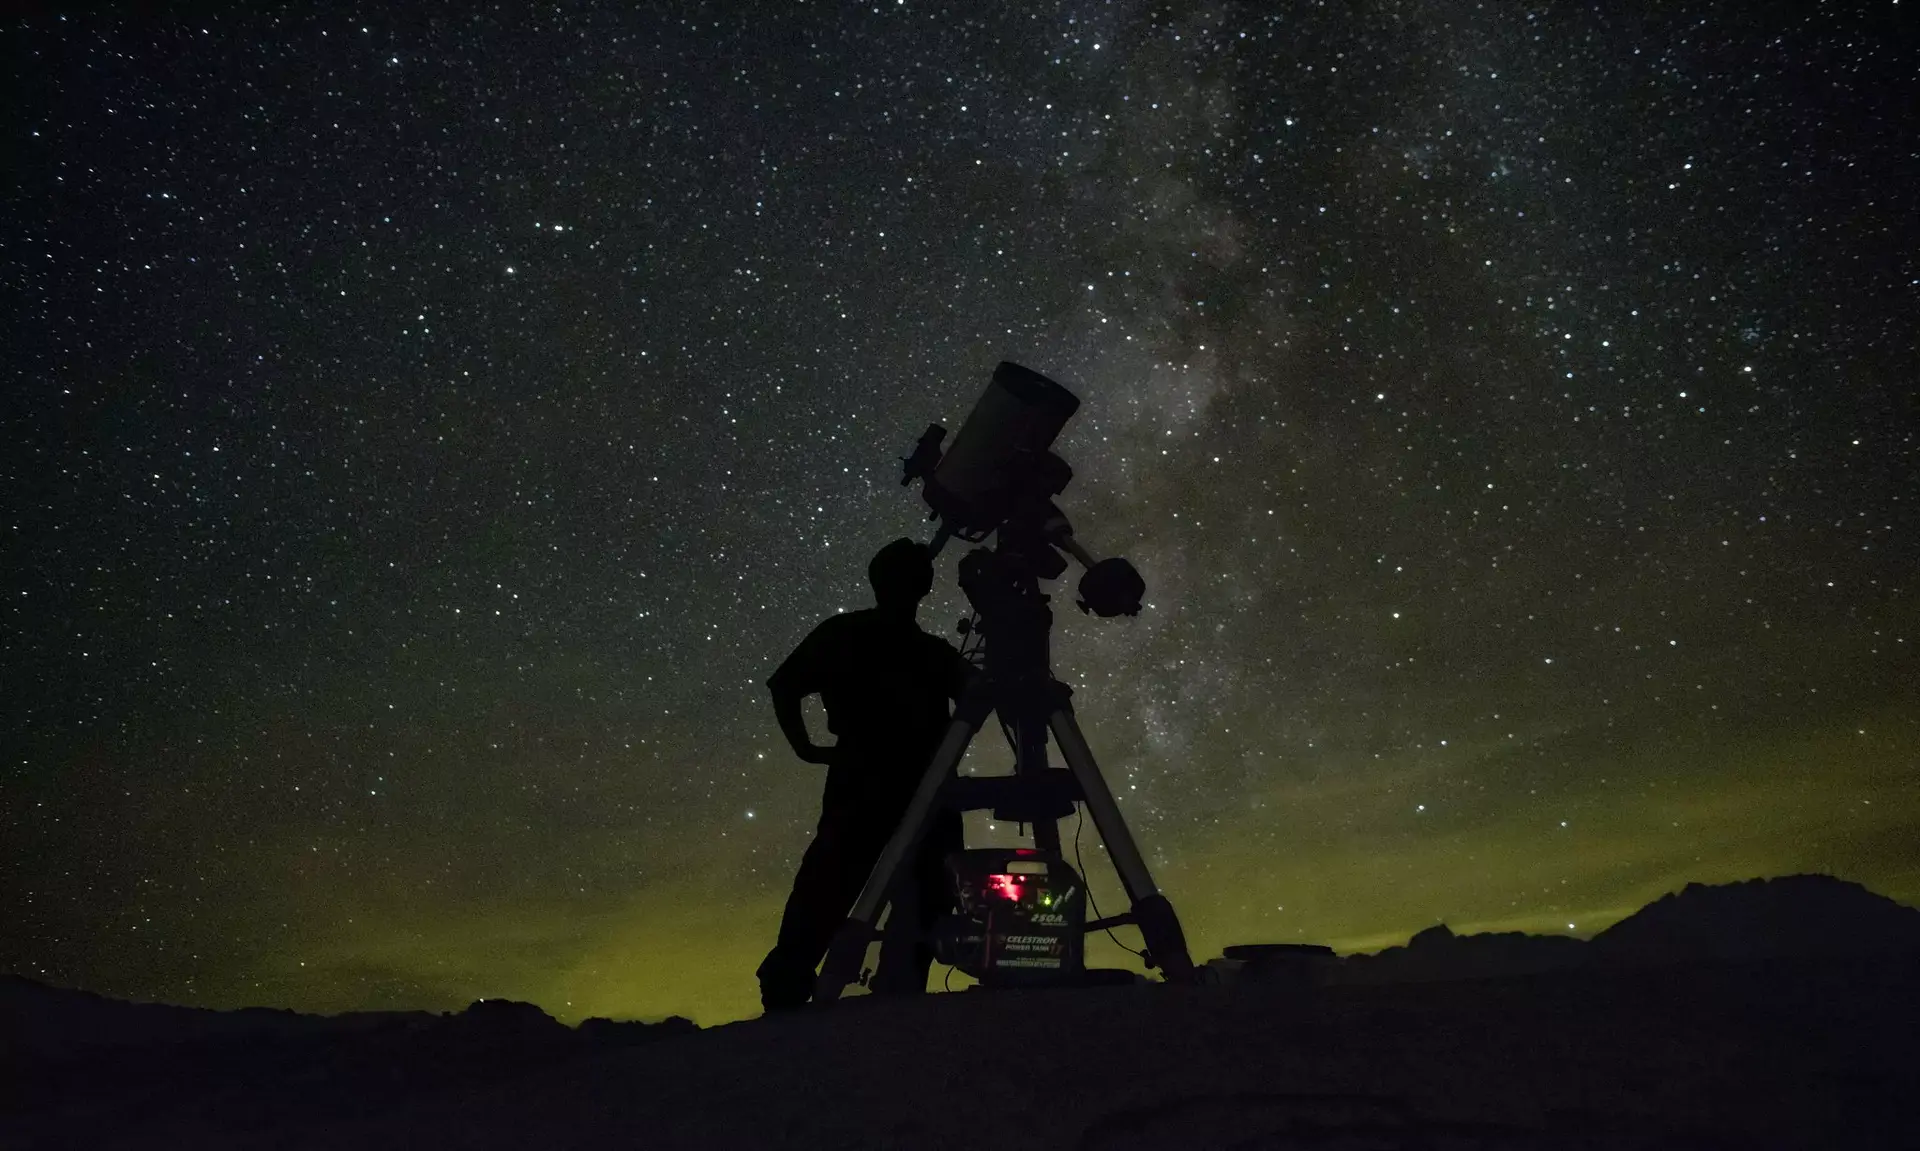 Finding the Ideal Destination for Your Next Stargazing Adventure